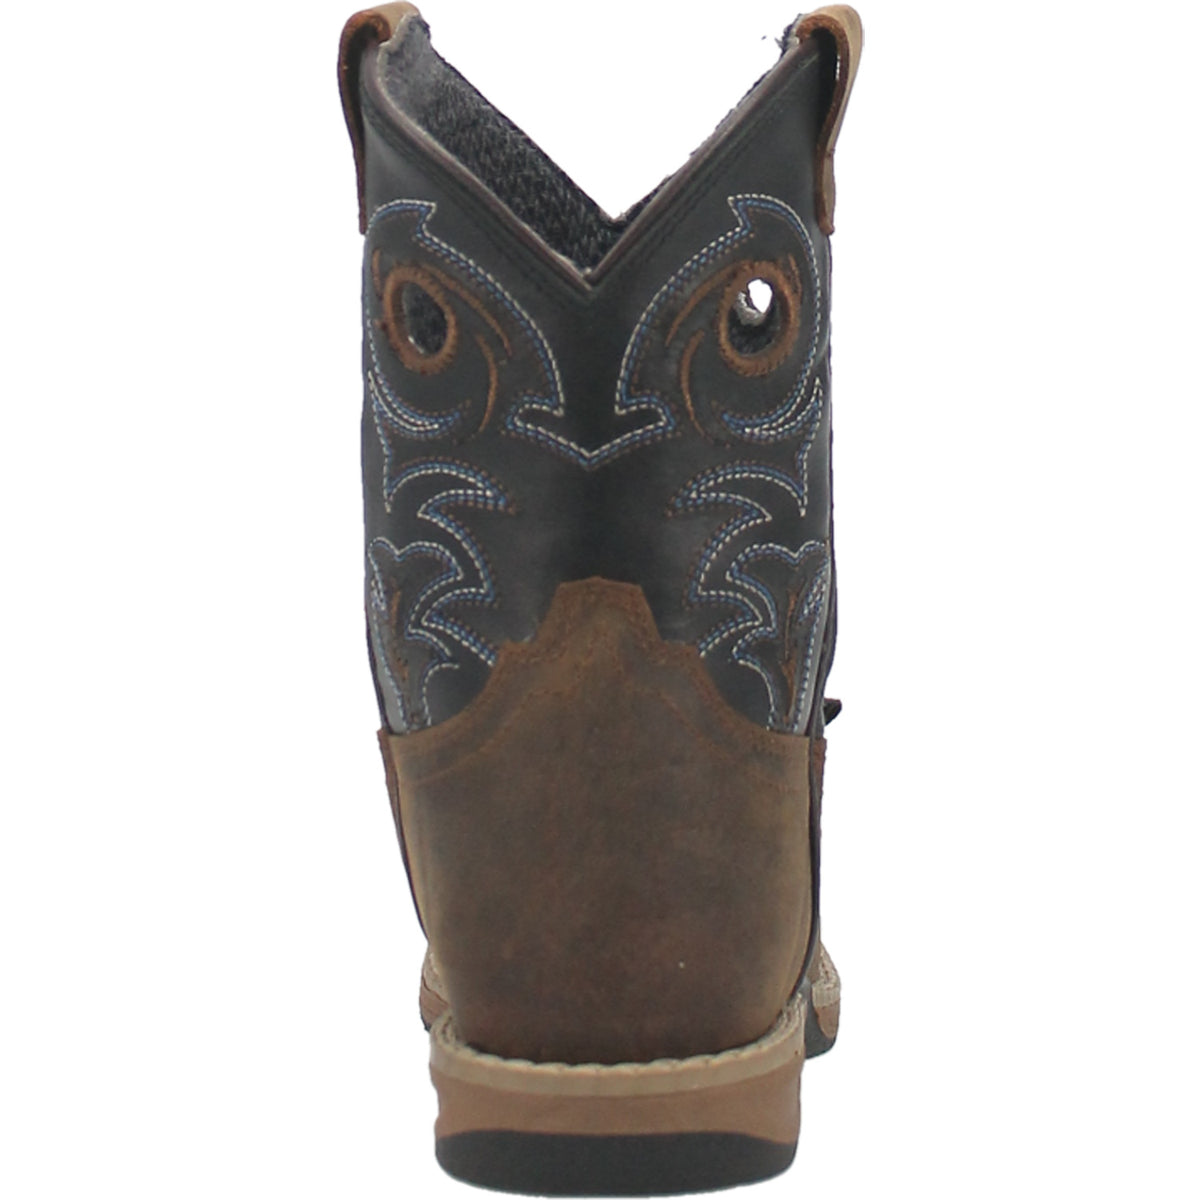 STORMS EYE JR LEATHER CHILDREN'S BOOT Cover